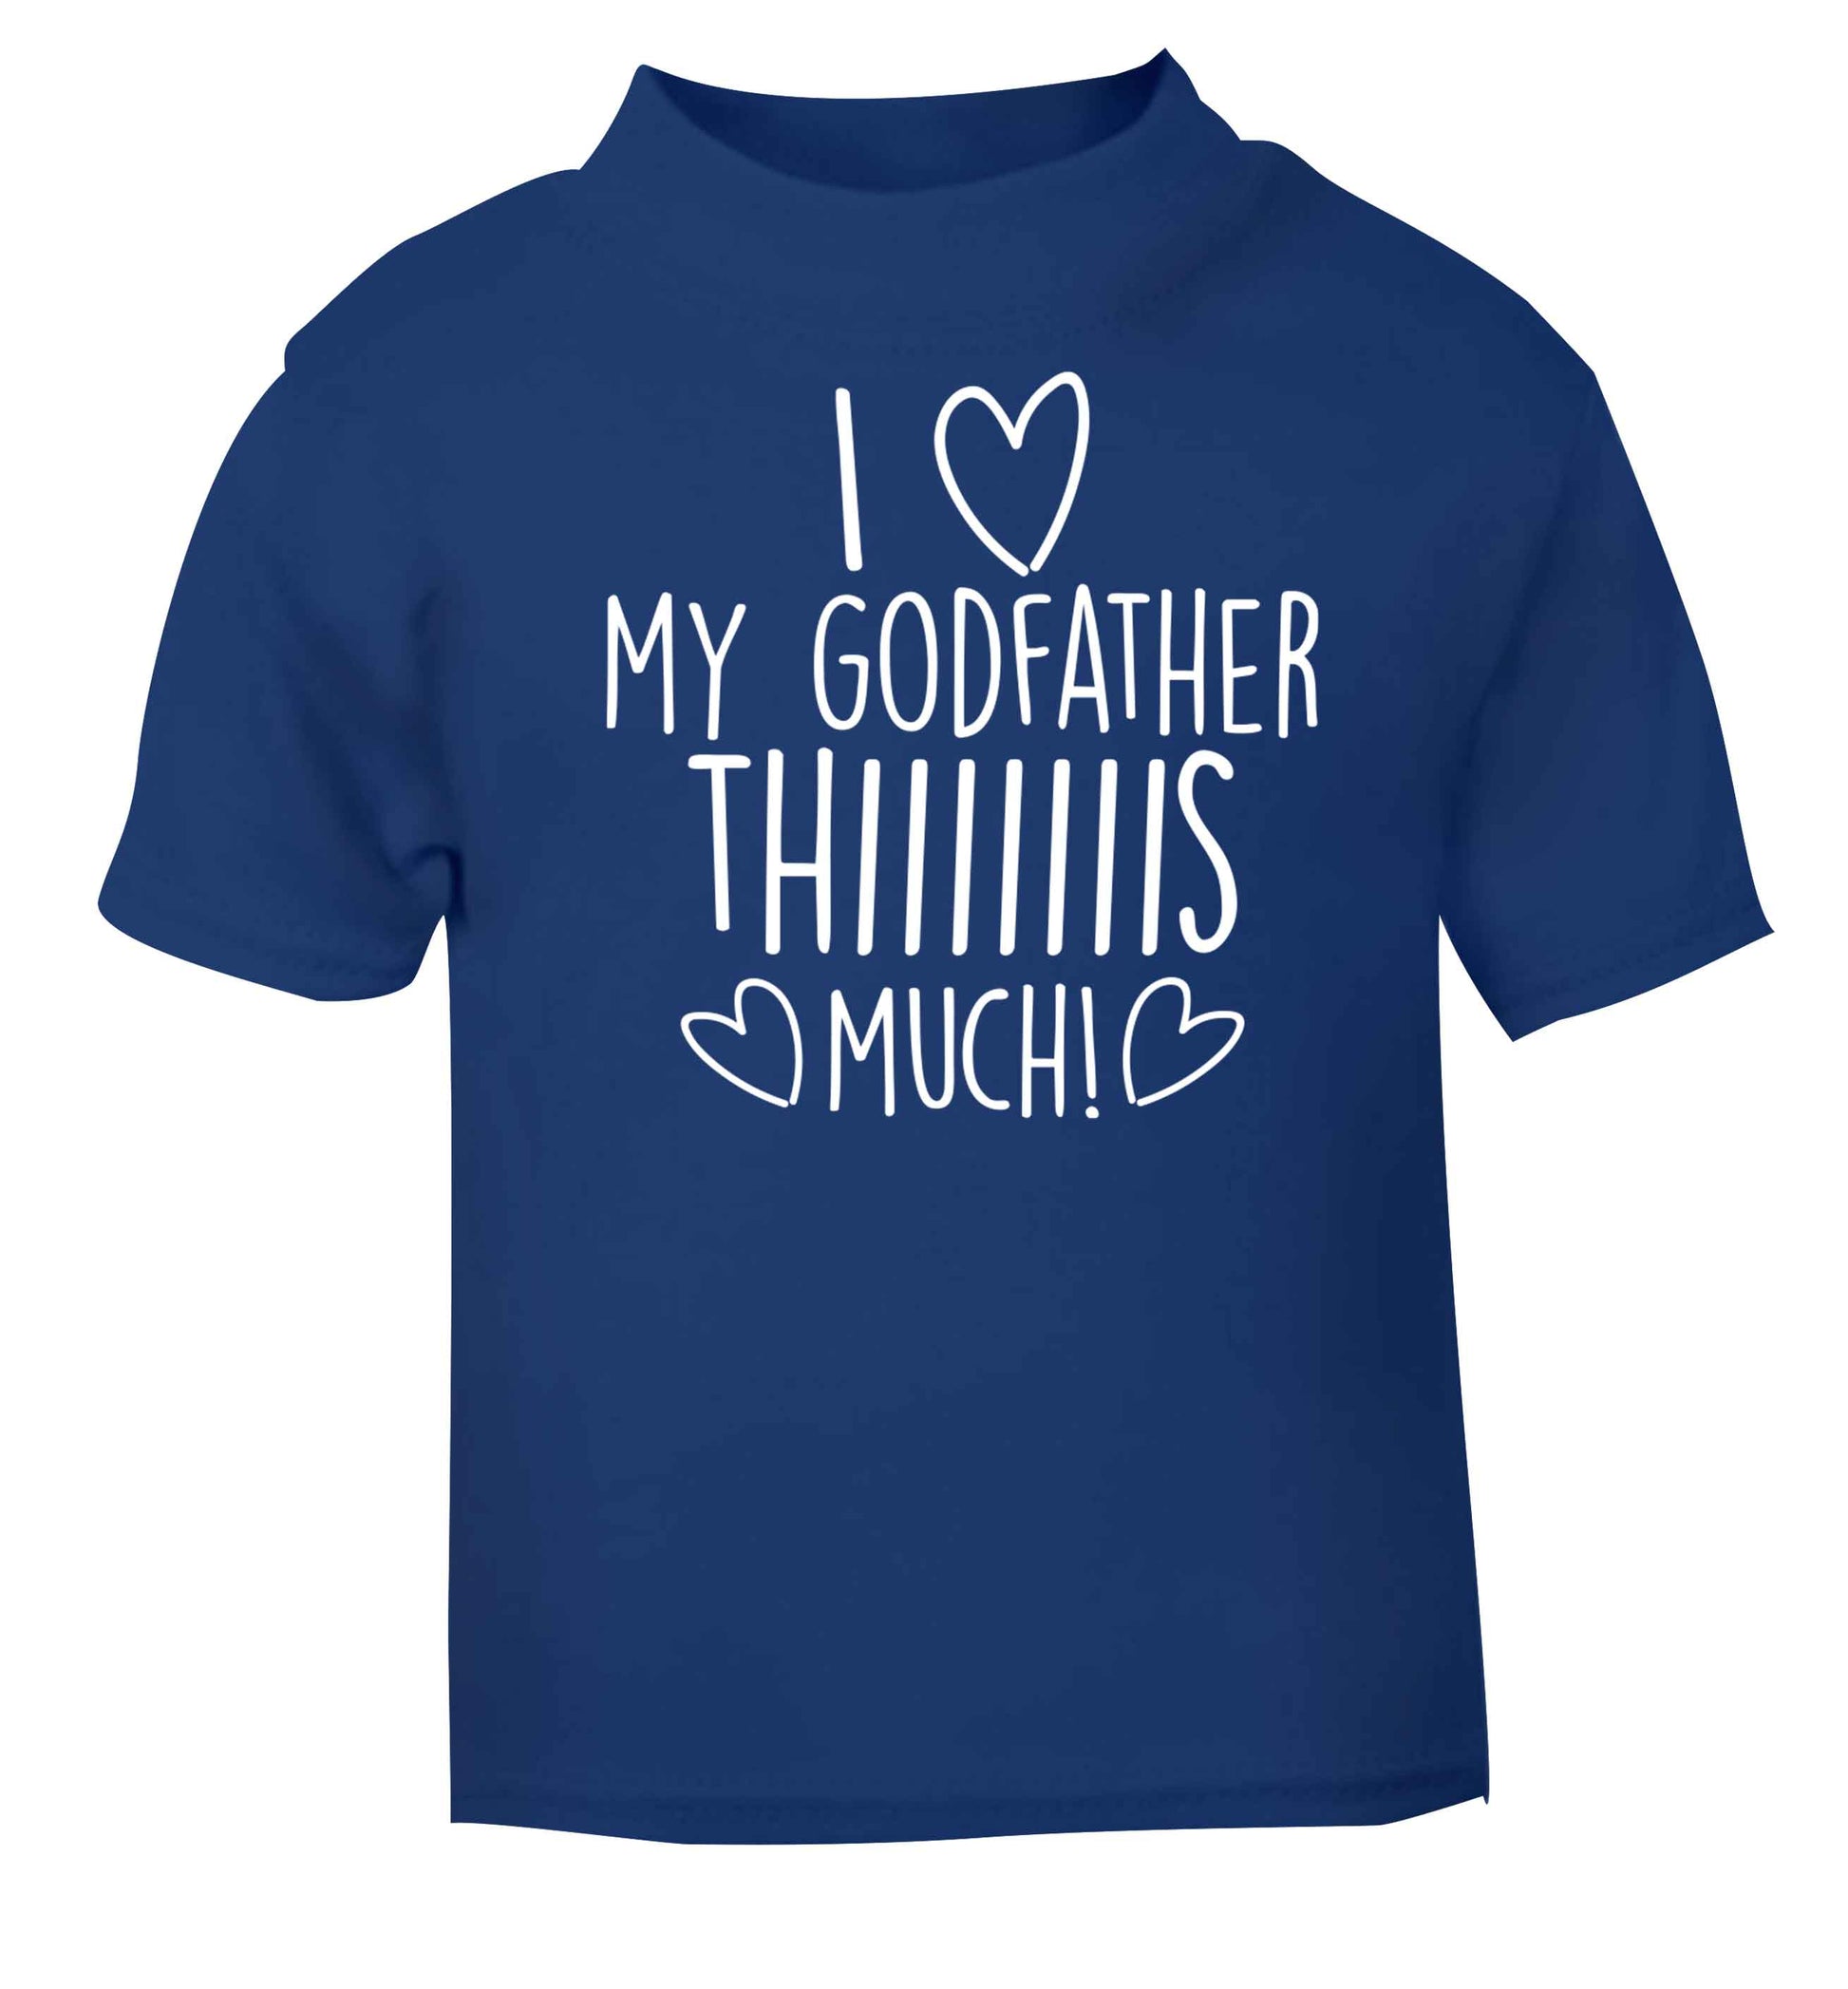 I love my Godfather this much blue baby toddler Tshirt 2 Years